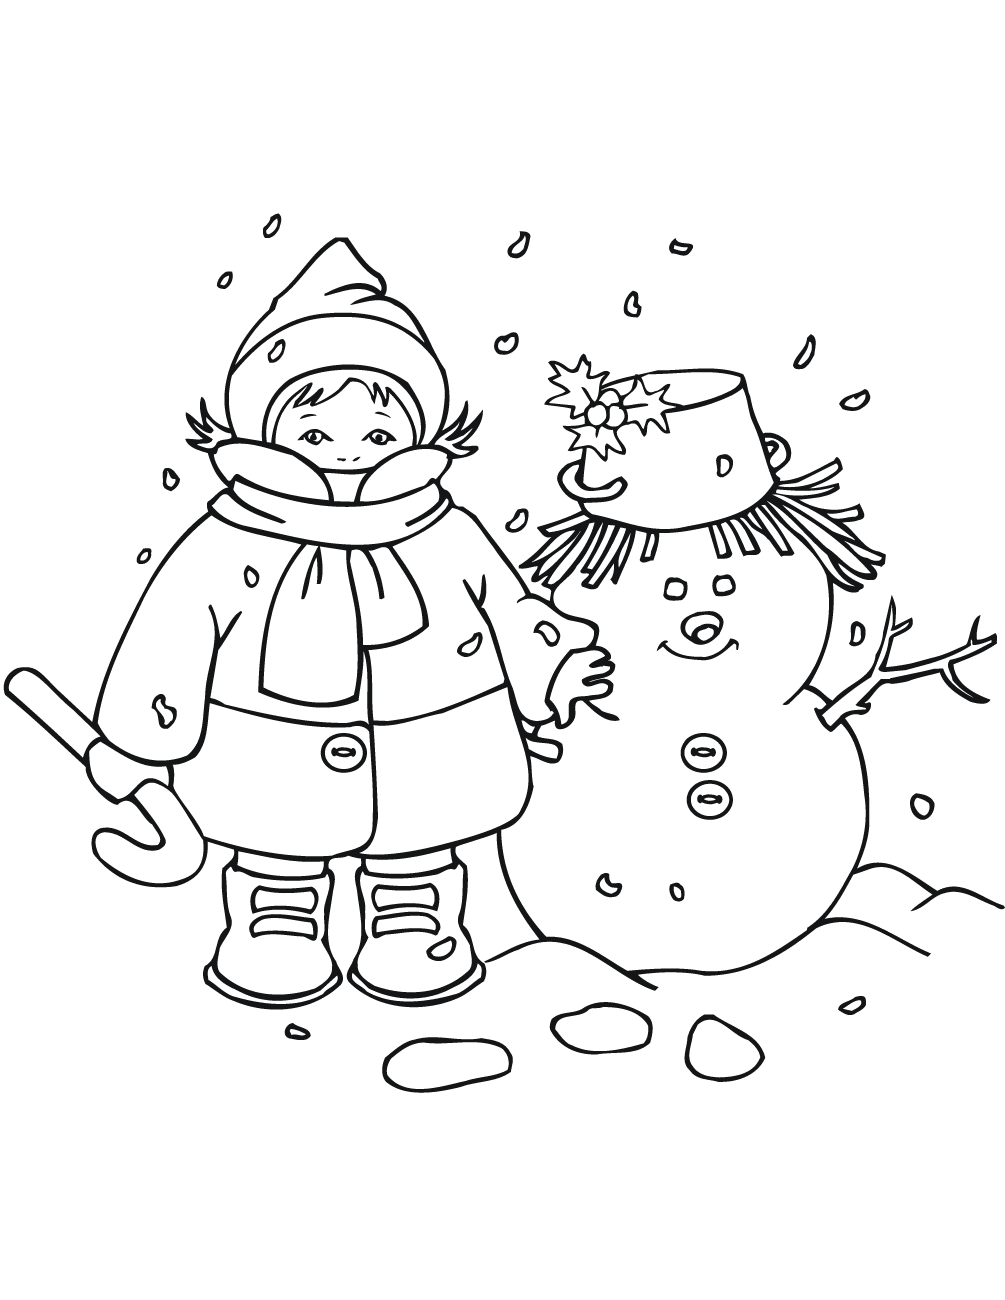 Boy And Snowman Coloring Sheet